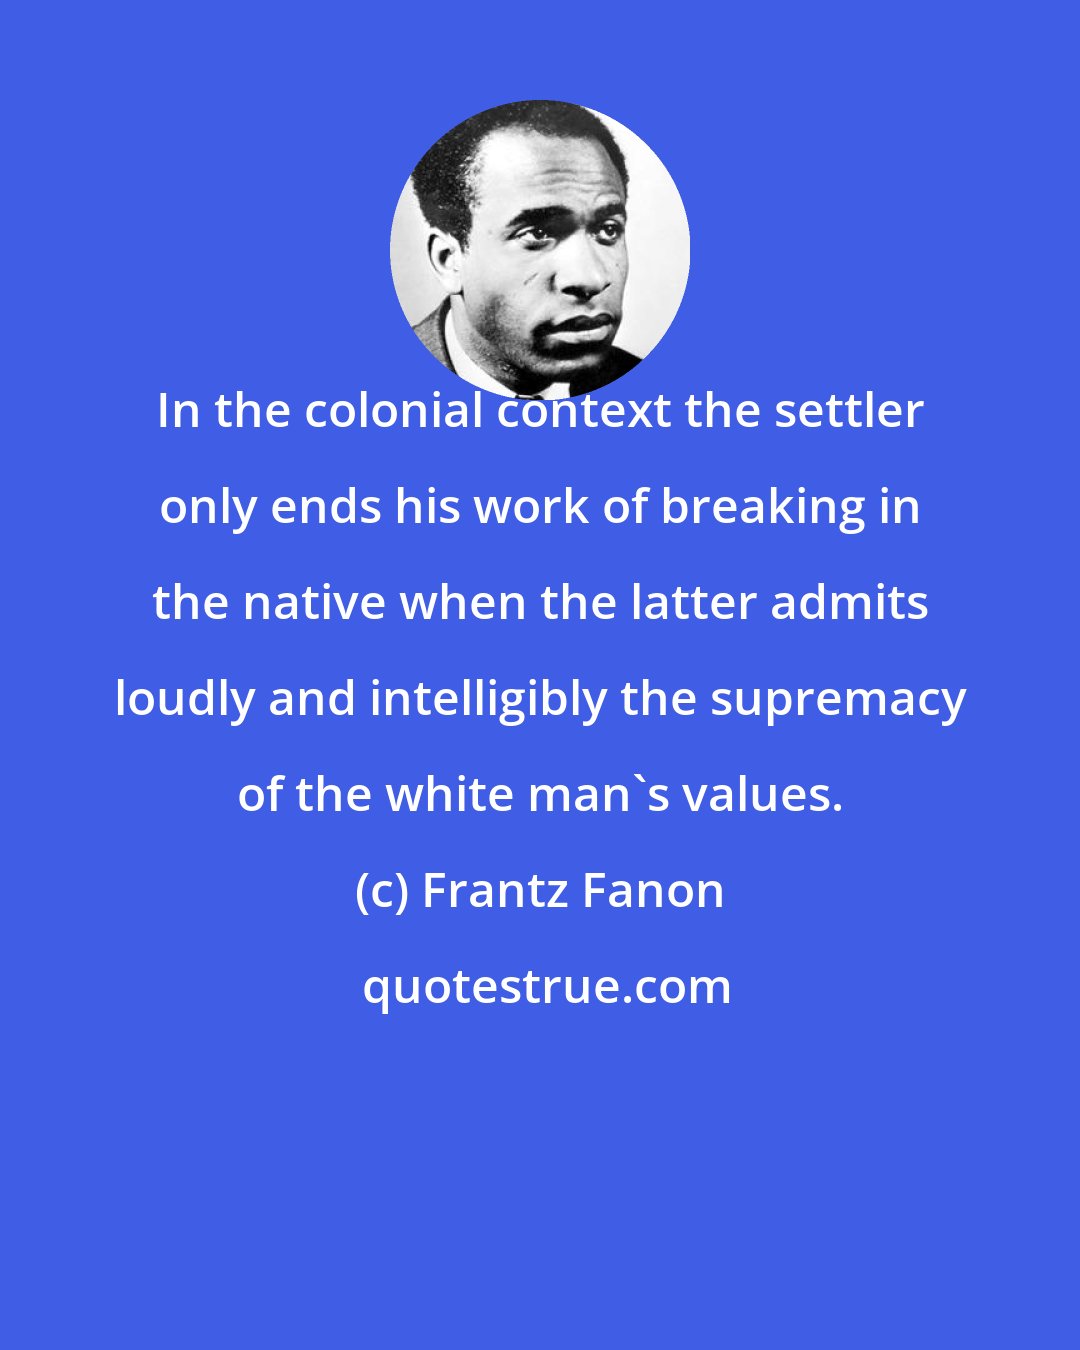 Frantz Fanon: In the colonial context the settler only ends his work of breaking in the native when the latter admits loudly and intelligibly the supremacy of the white man's values.